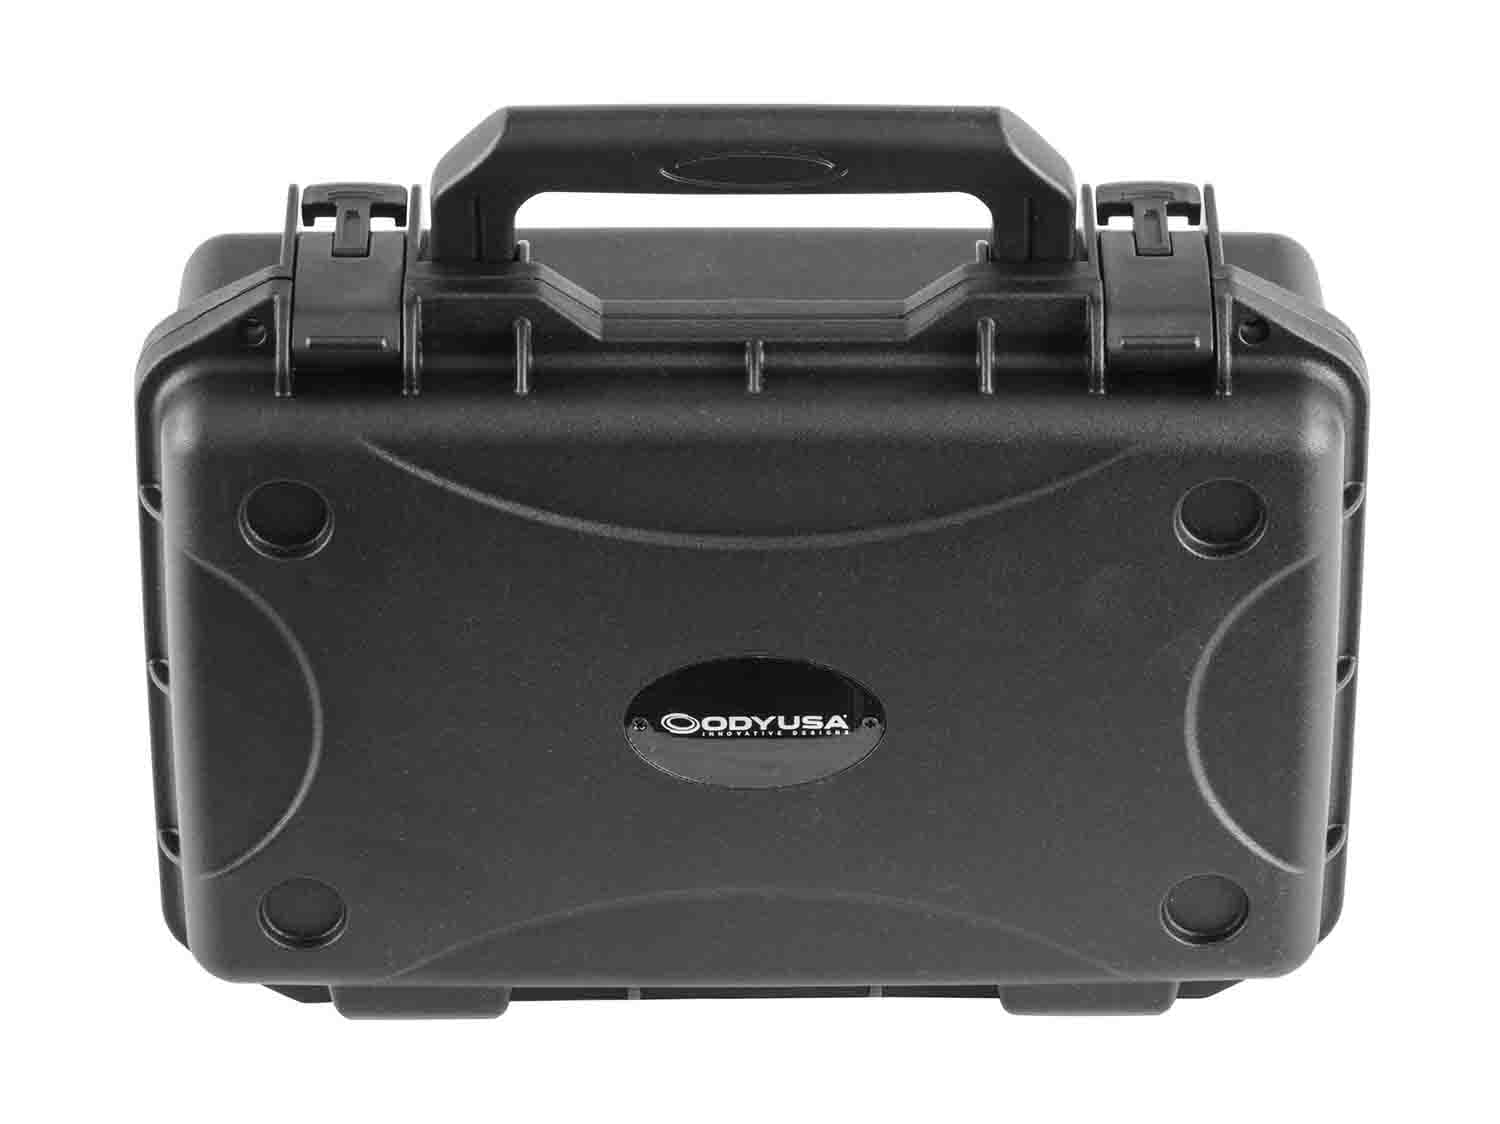 Odyssey VU100603 Vulcan Injection-Molded Utility Case with Pluck Foam - 10.75 x 6.5 x 2.25-Inch Interior - Hollywood DJ